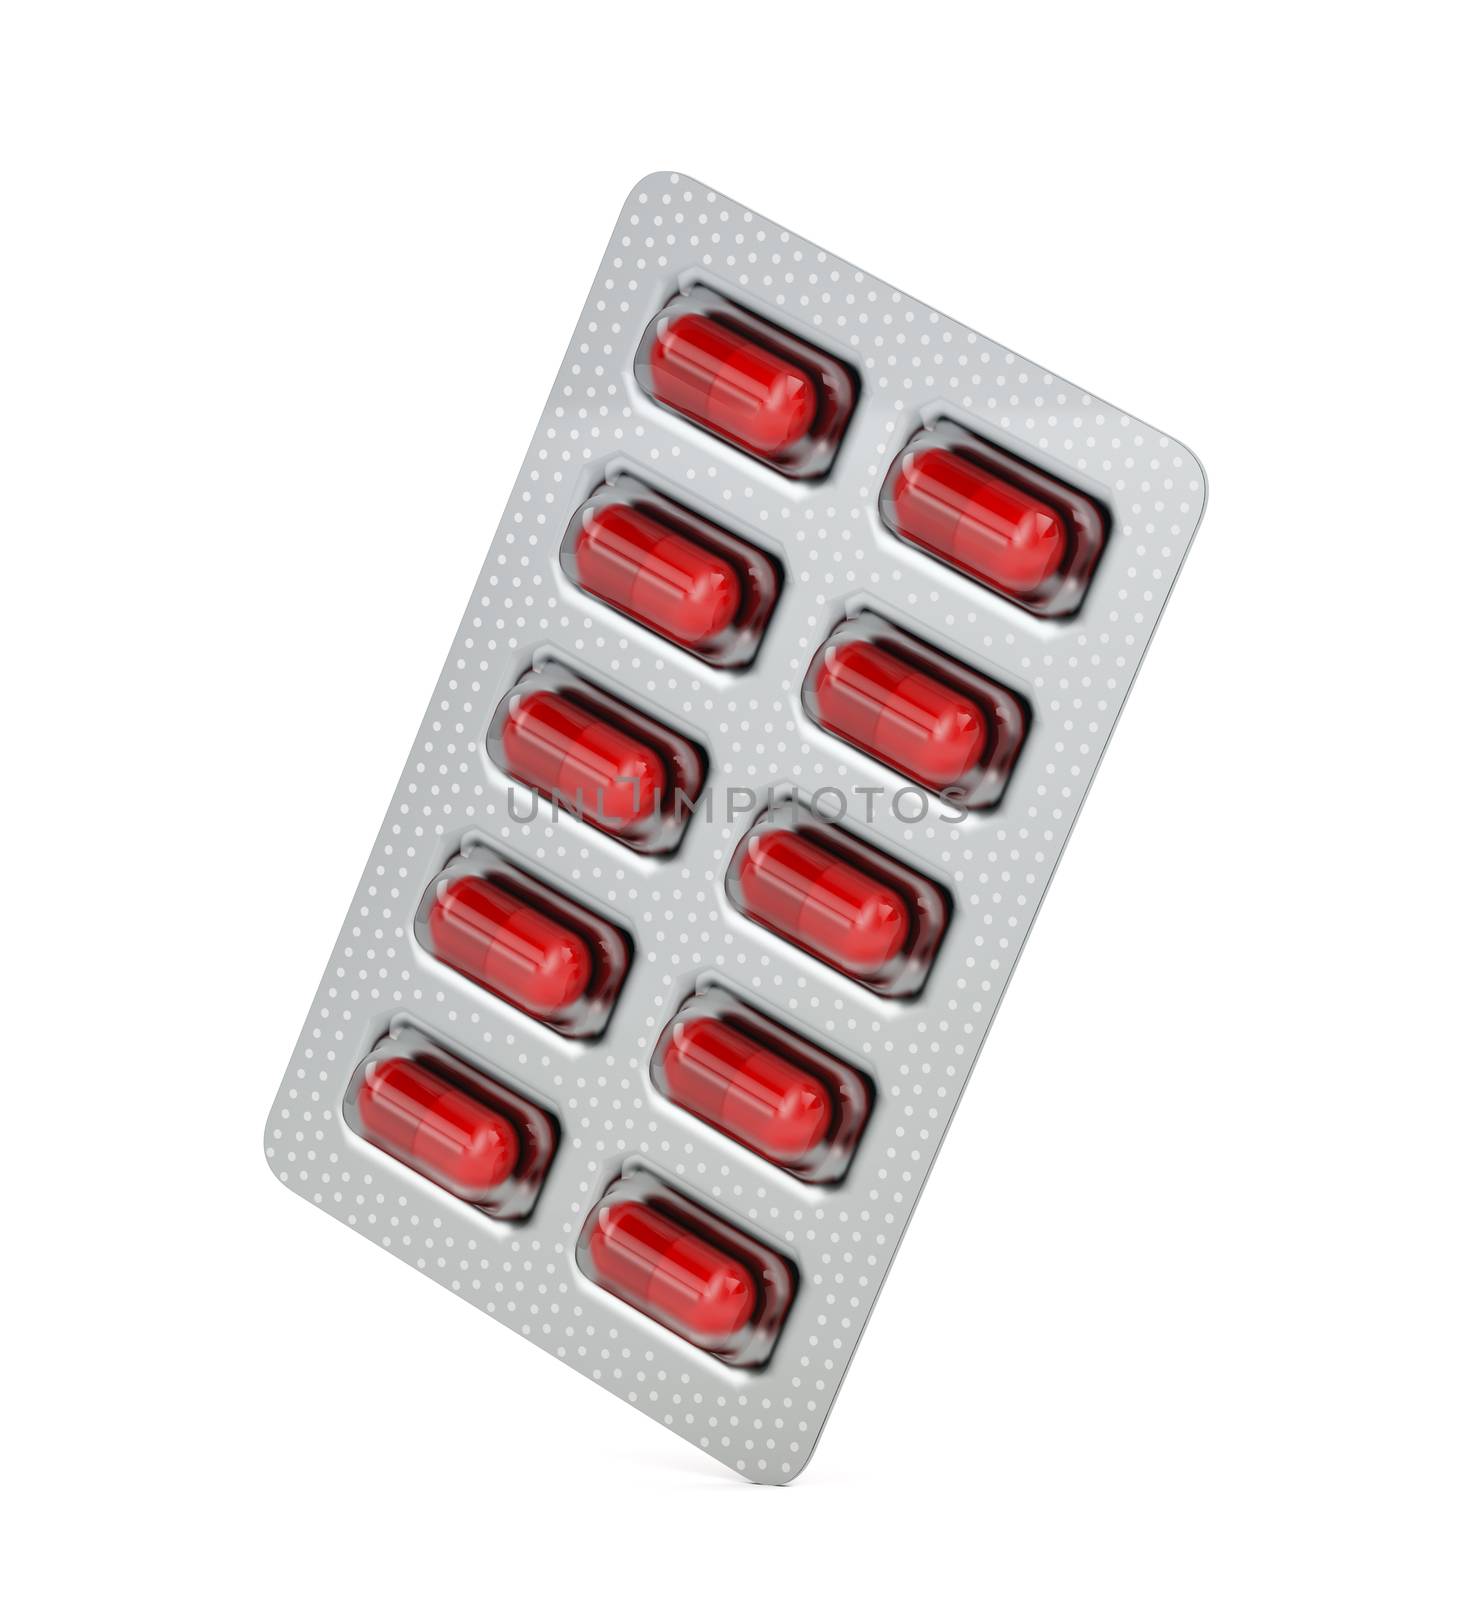 Capsules in blister pack by magraphics